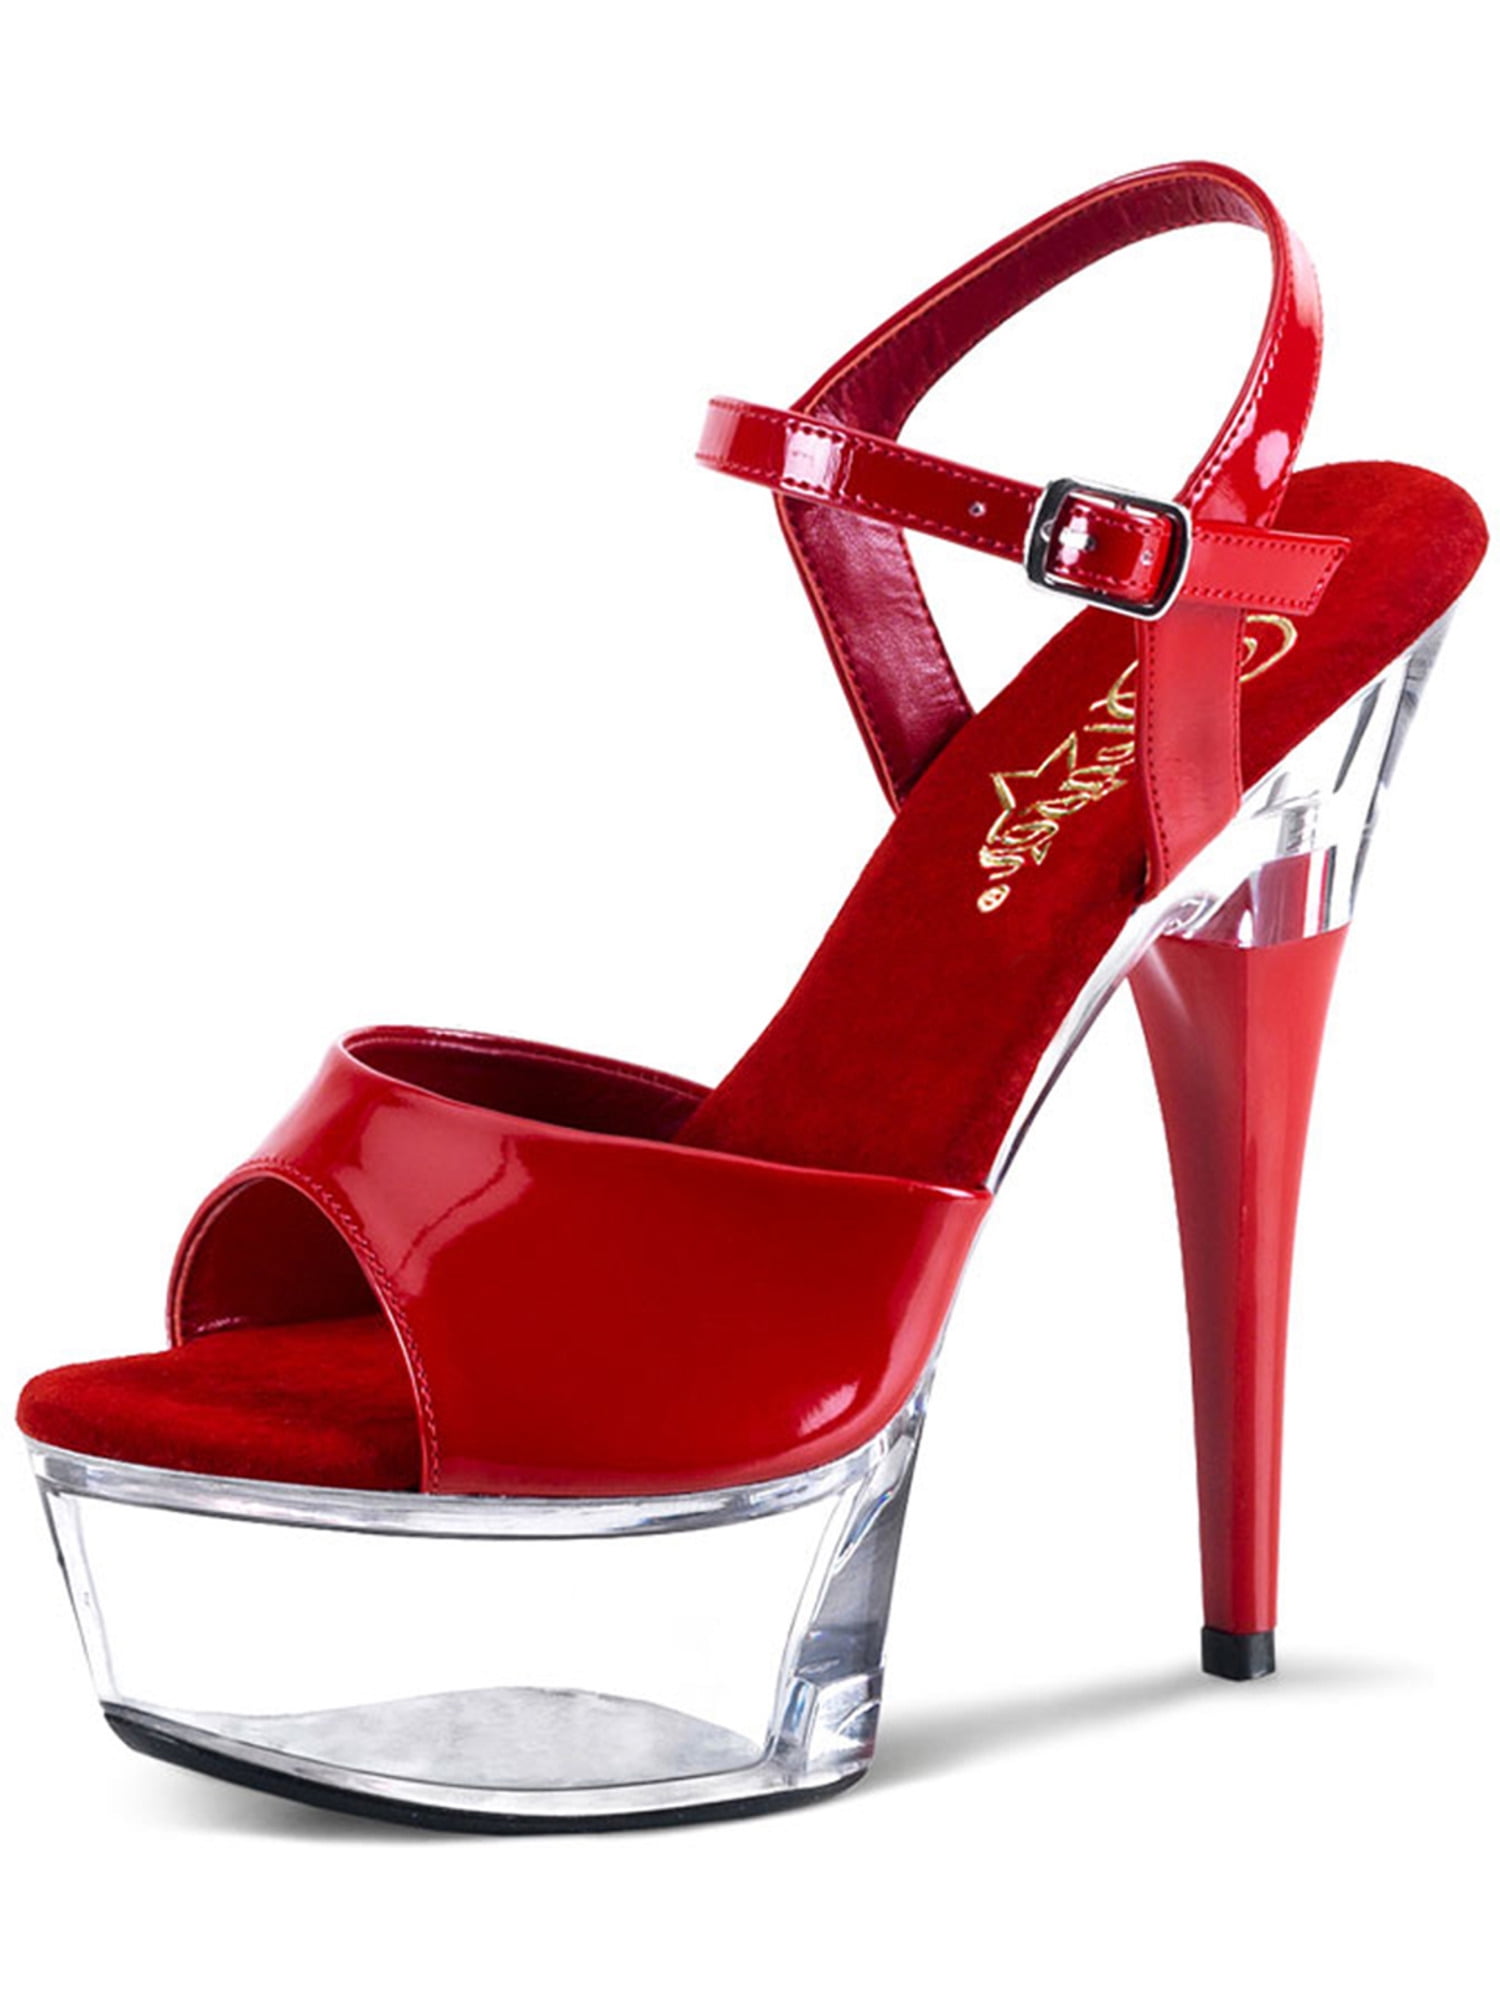 red and silver high heels